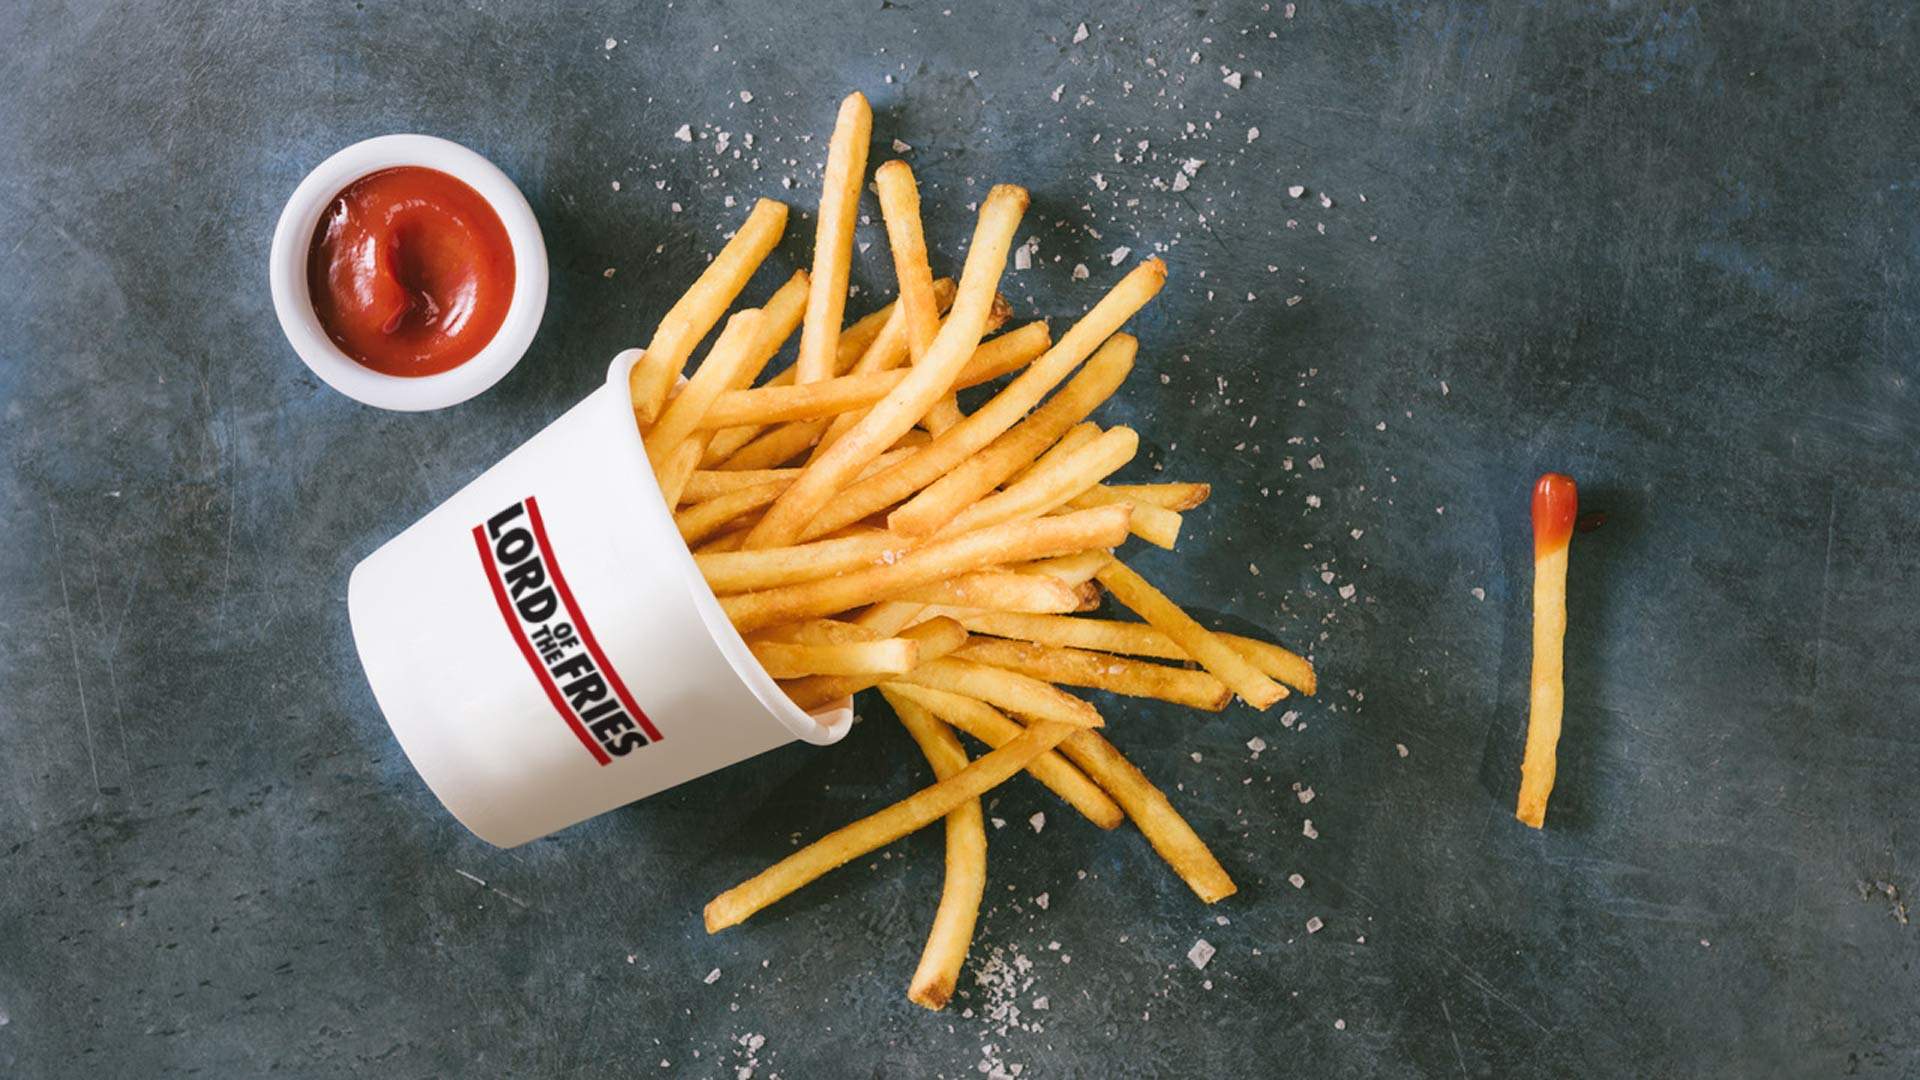 Lord of the Fries Is Giving Away Free Fries This Week